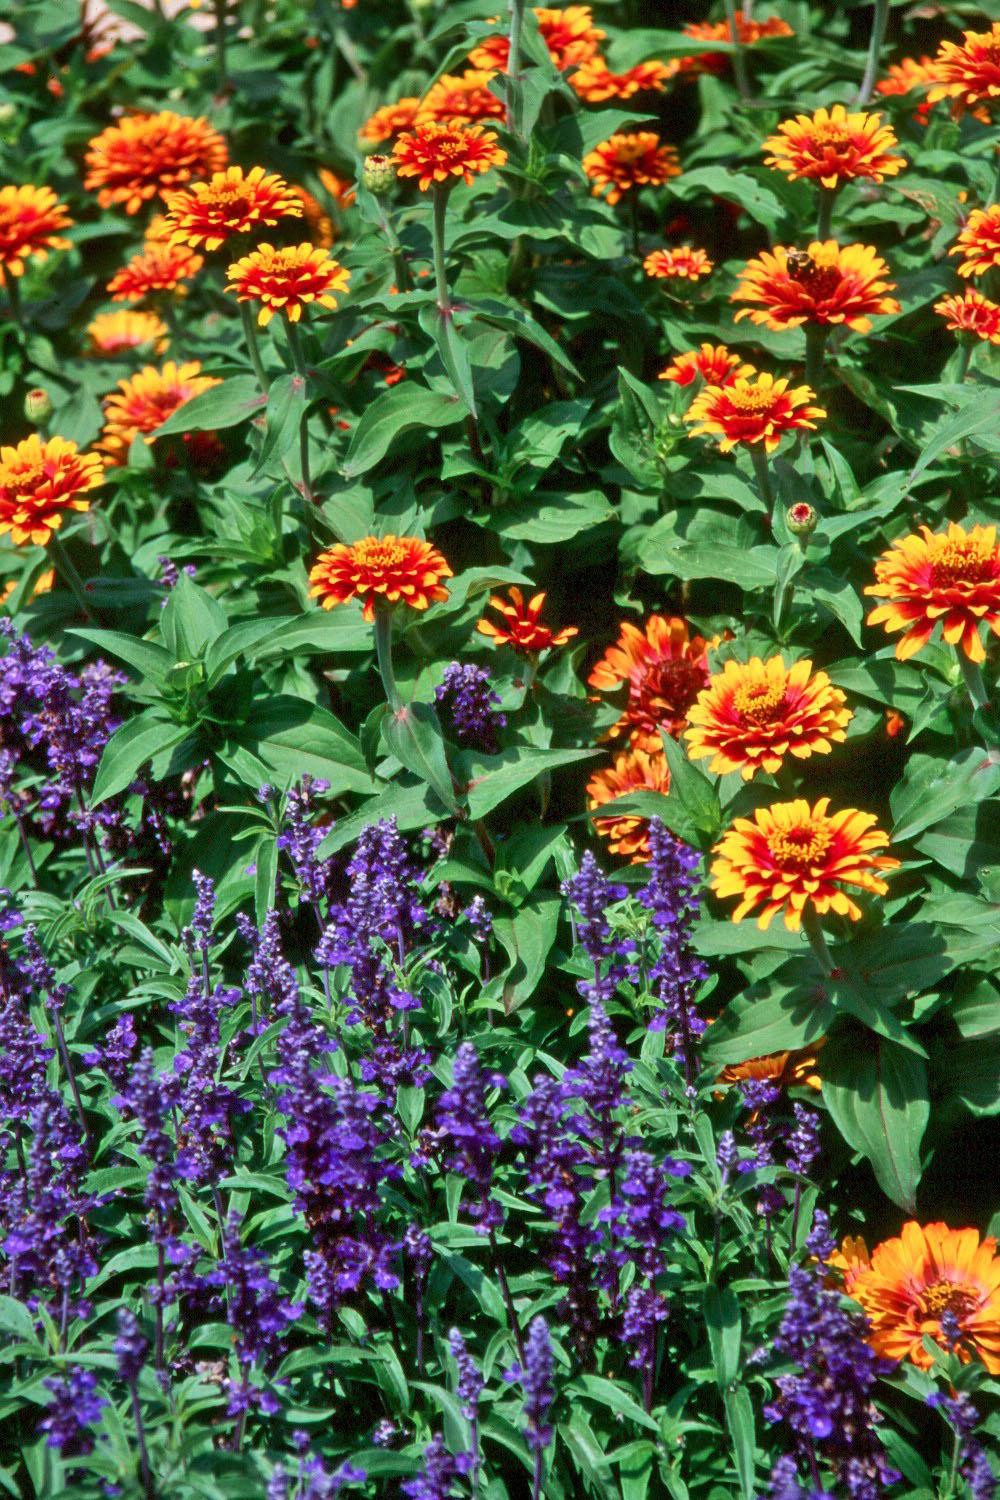 Zowie! Yellow Flame zinnia and Evolution salvia make a dynamic duo in this landscape. Both make great cut flowers for the vase and can be dried for an everlasting bouquet. Unlike any other zinnia, each Zowie bloom flames with a scarlet-rose center and yellow petal edges. Evolution provides a slightly richer color that Victoria Blue salvia.